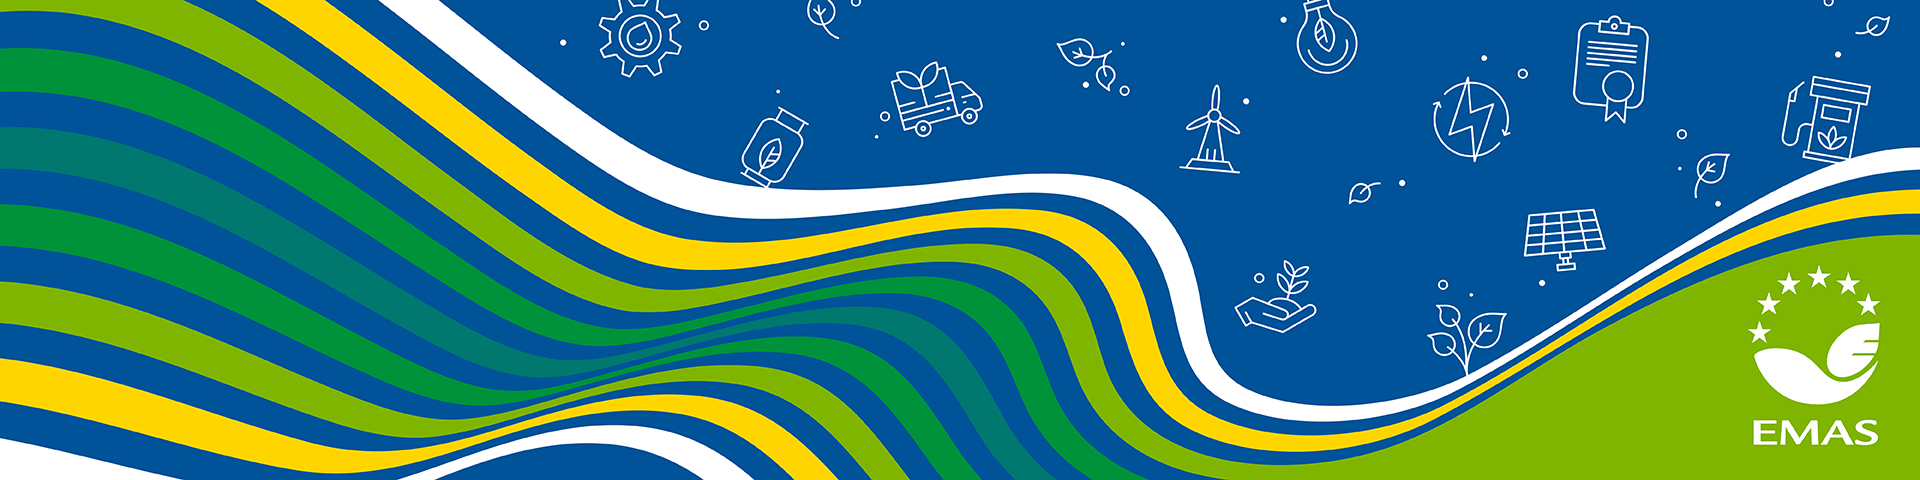 Horizontal banner with yellow, green and blue waves coming from left to the right, blue background on the right with small icons representing renewable energy resources, and green bottom right corner with the EMAS logo  